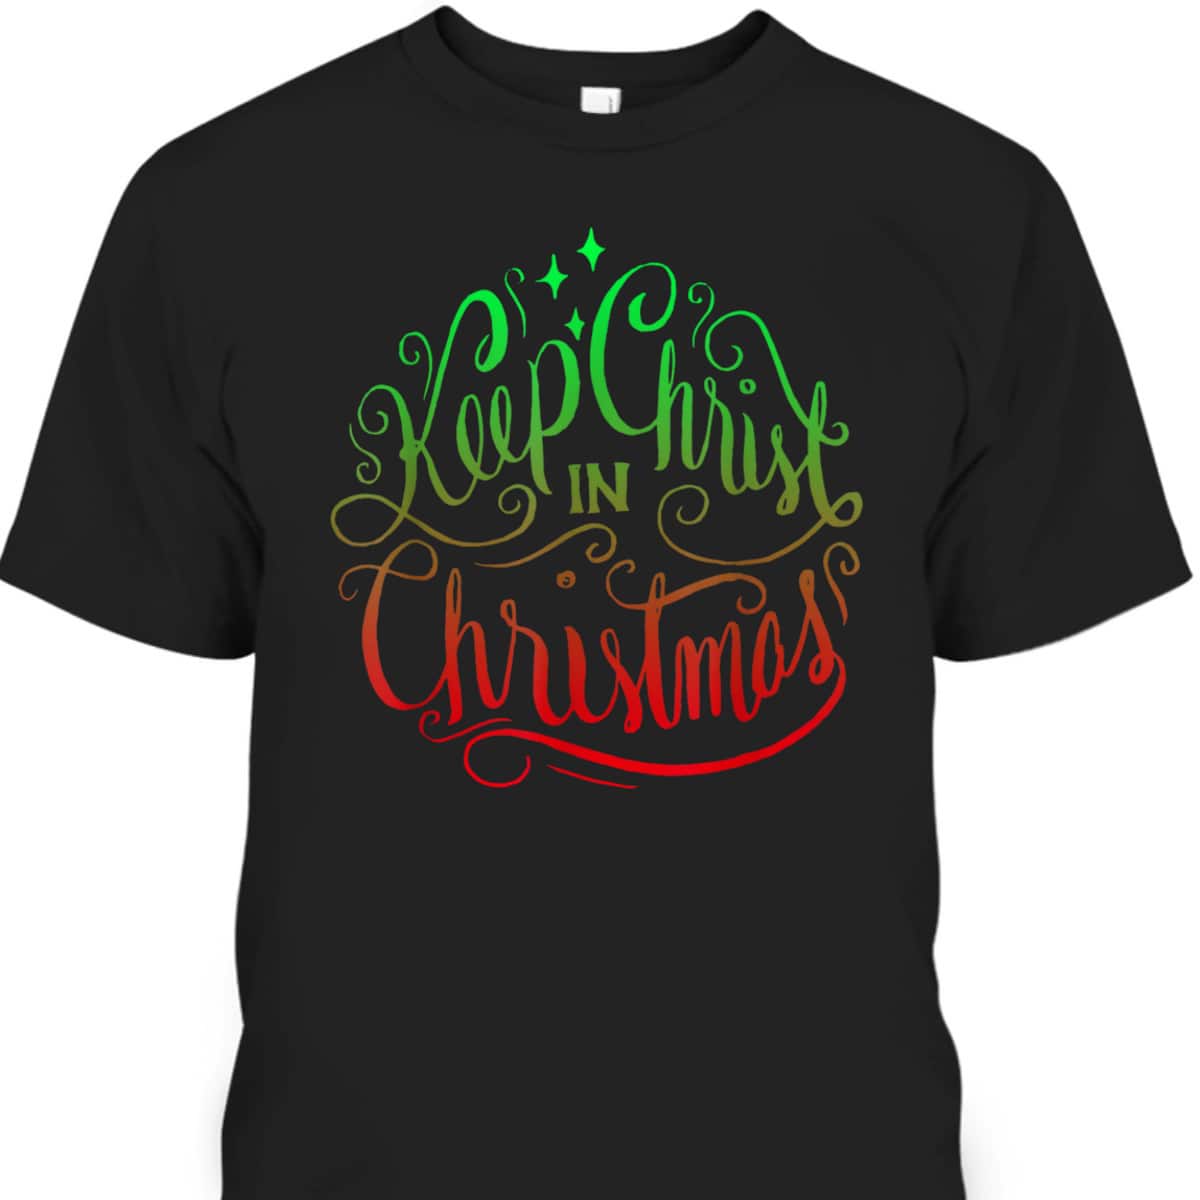 Keep Christ In Christmas Christian Inspire Holiday T-Shirt